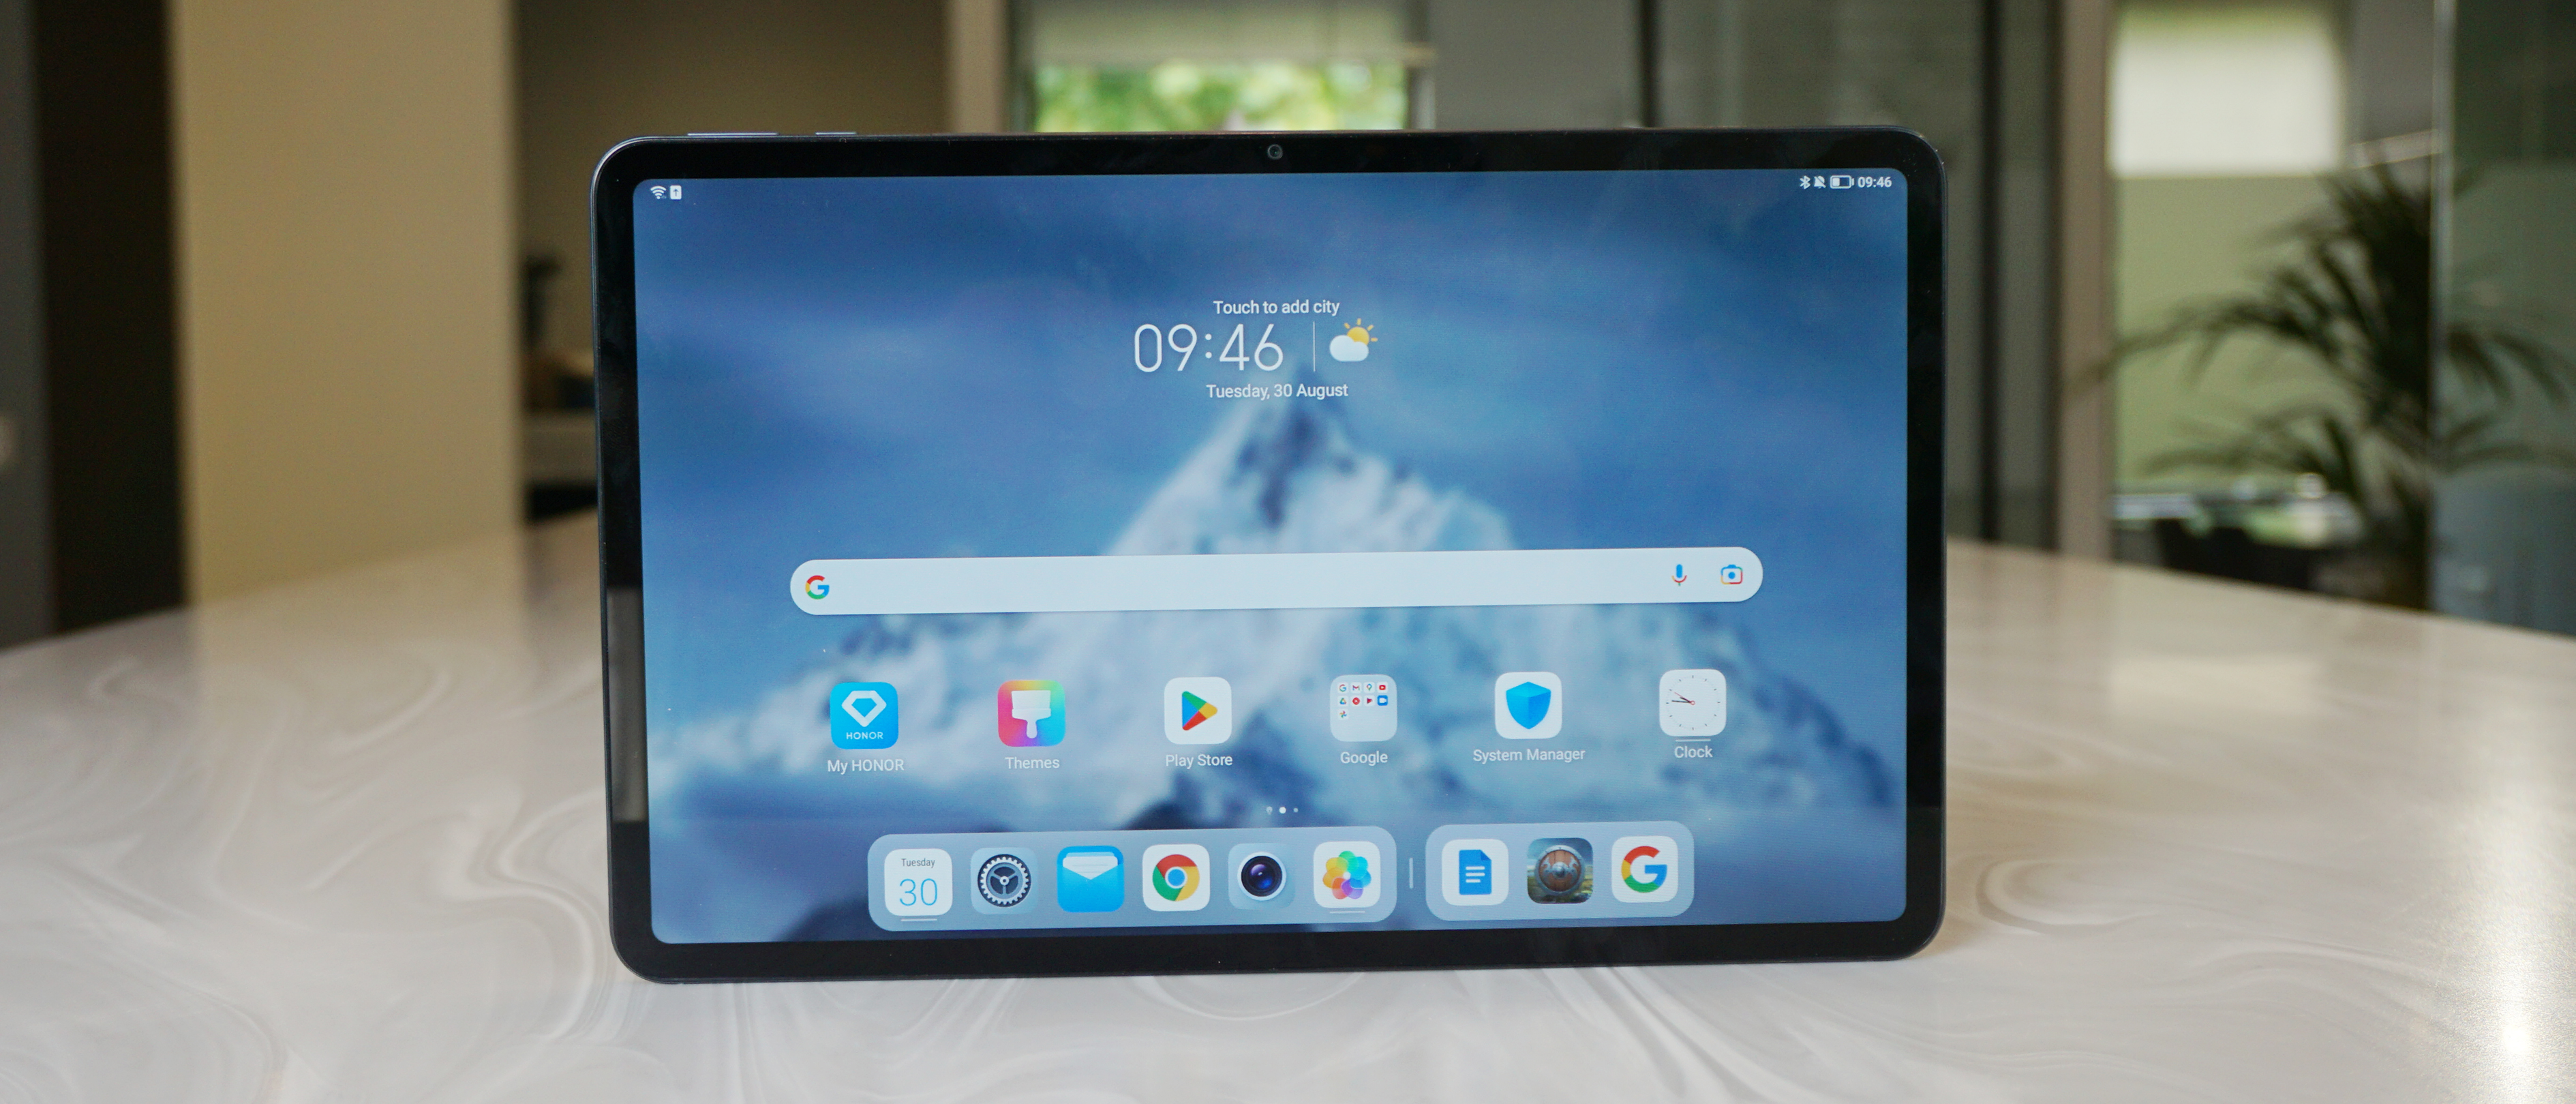 Honor Pad 7: An affordable tablet with a 10.1-inch display and a